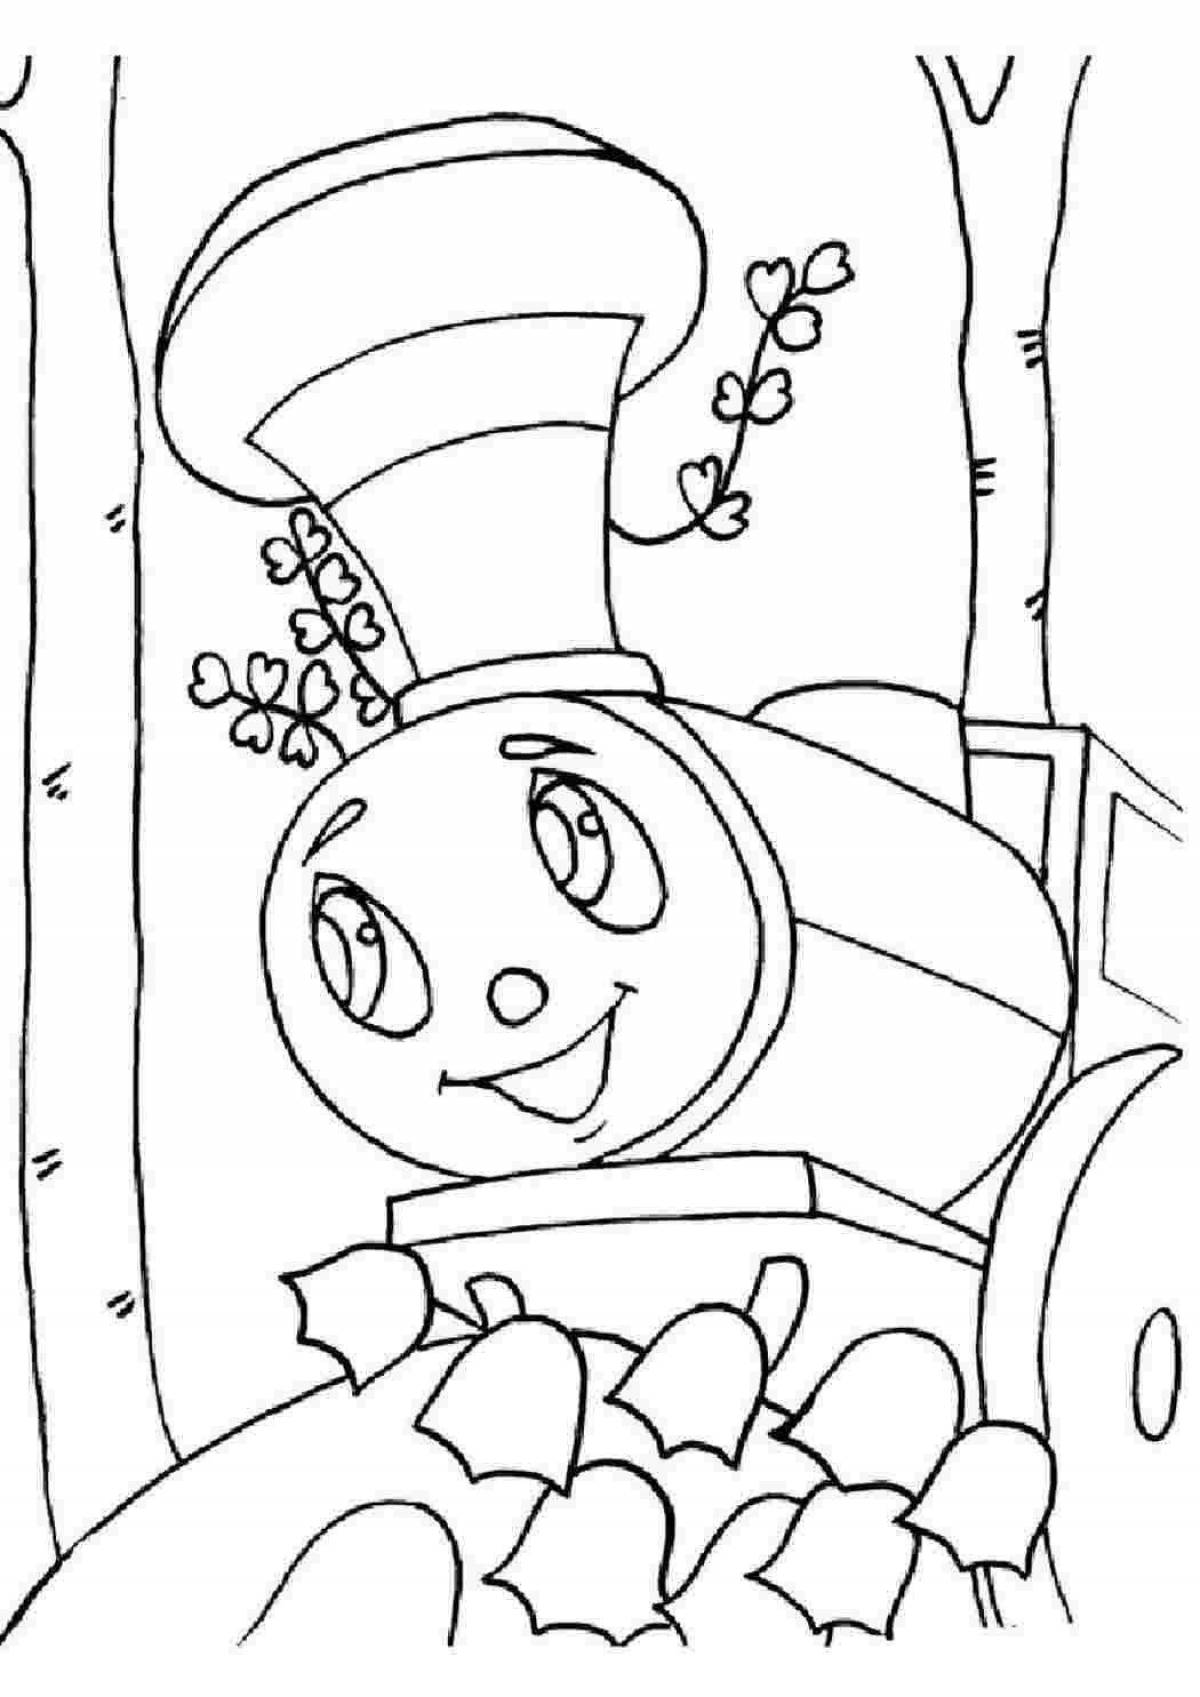 Stimulating train coloring pages for kids